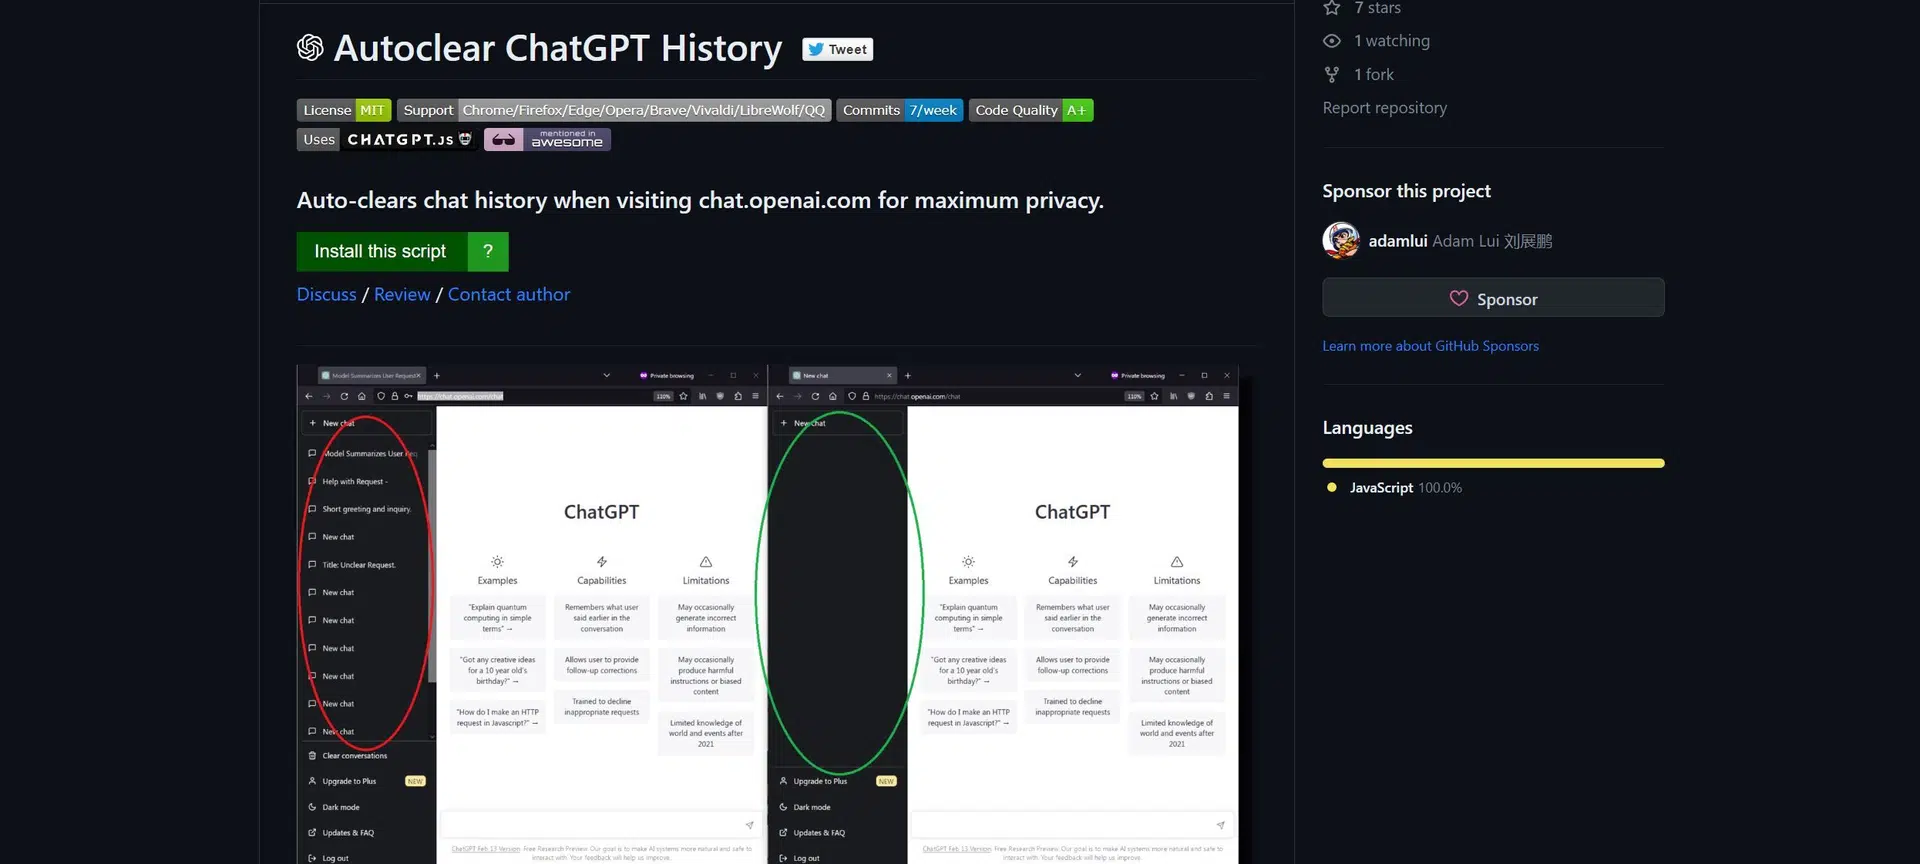 Autoclear ChatGPT Historywebsite picture